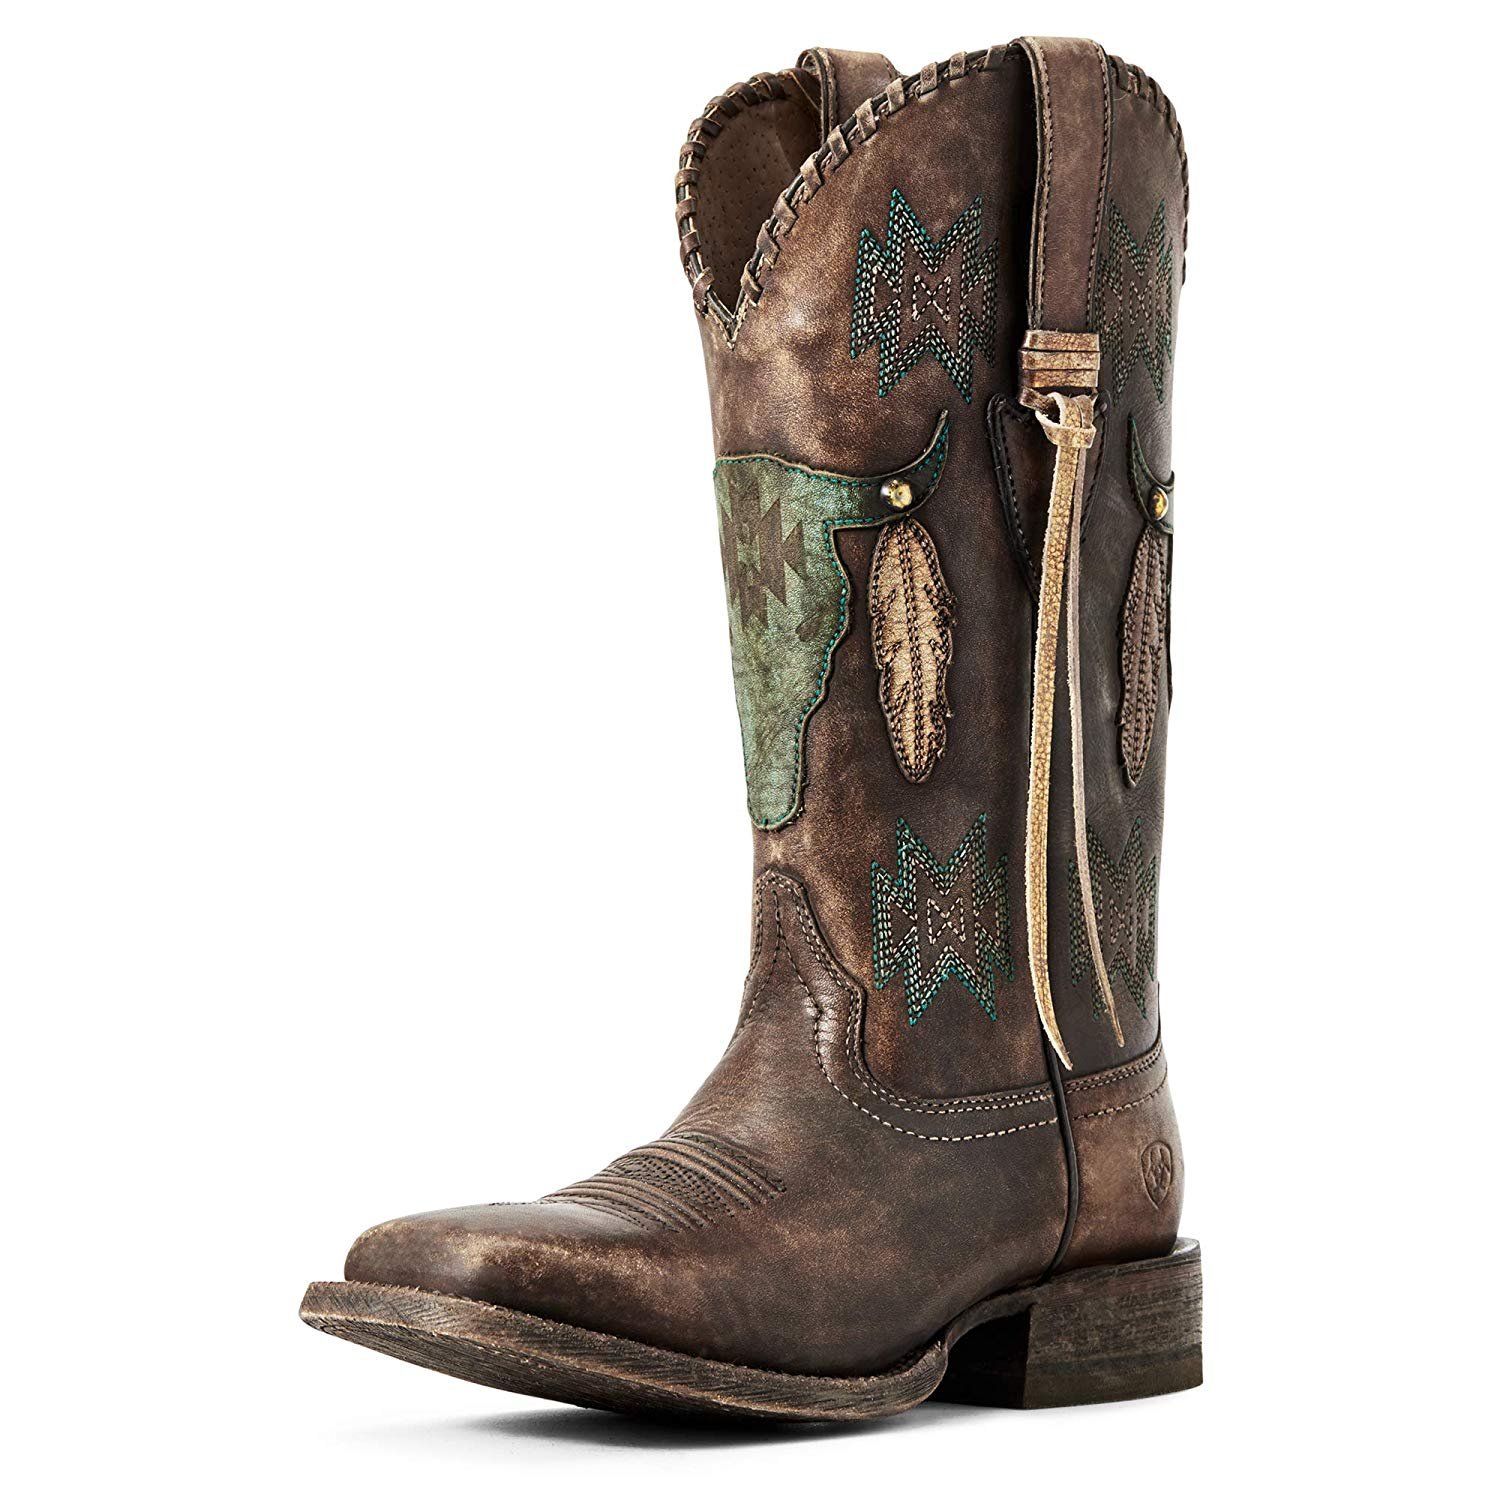 ARIAT Women's Tallahassee Western Boot, Naturally Distressed Brown | eBay